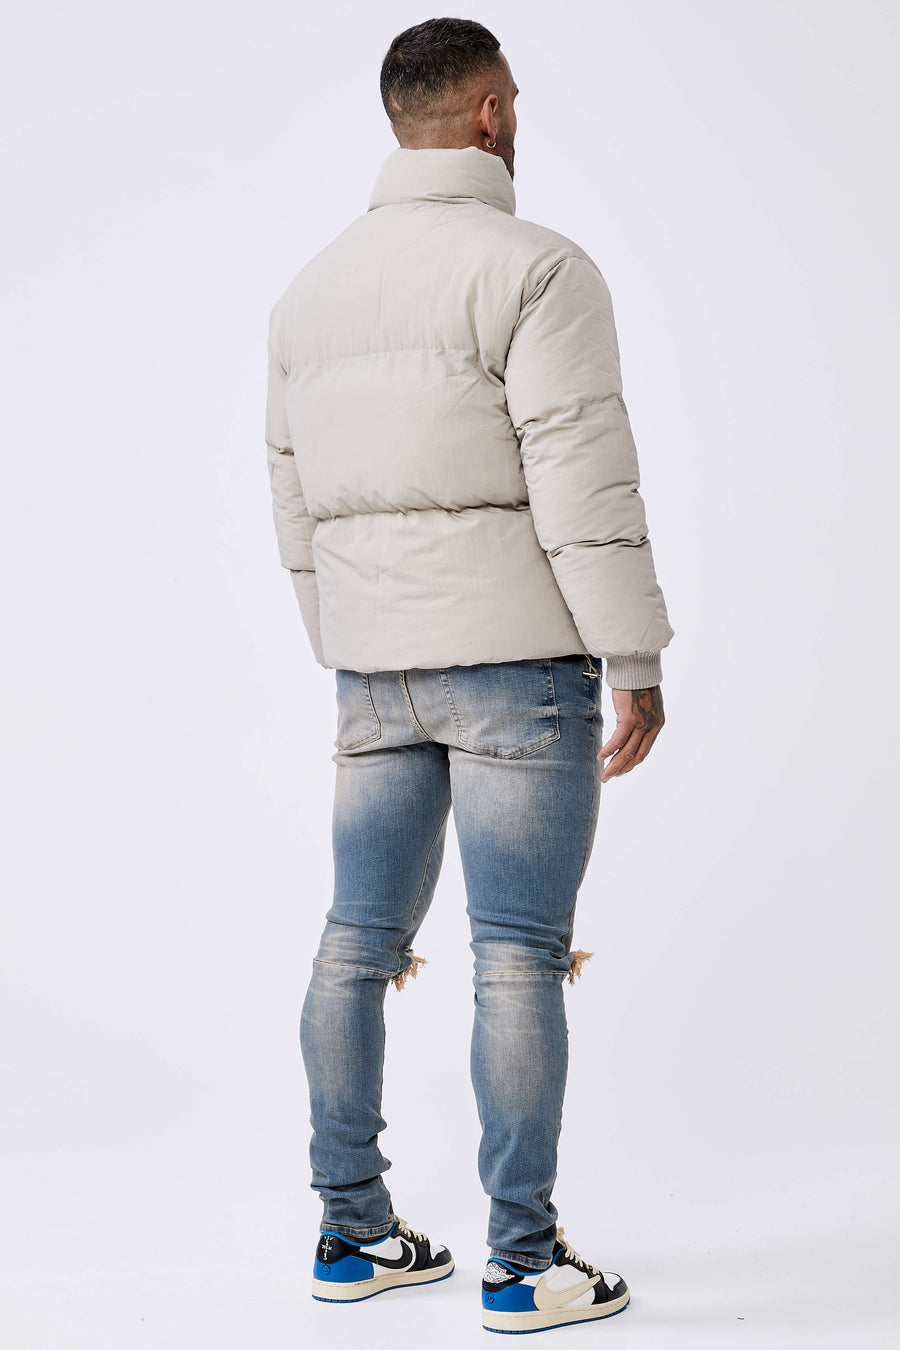 Legend London PUFFER JACKET - TAUPE